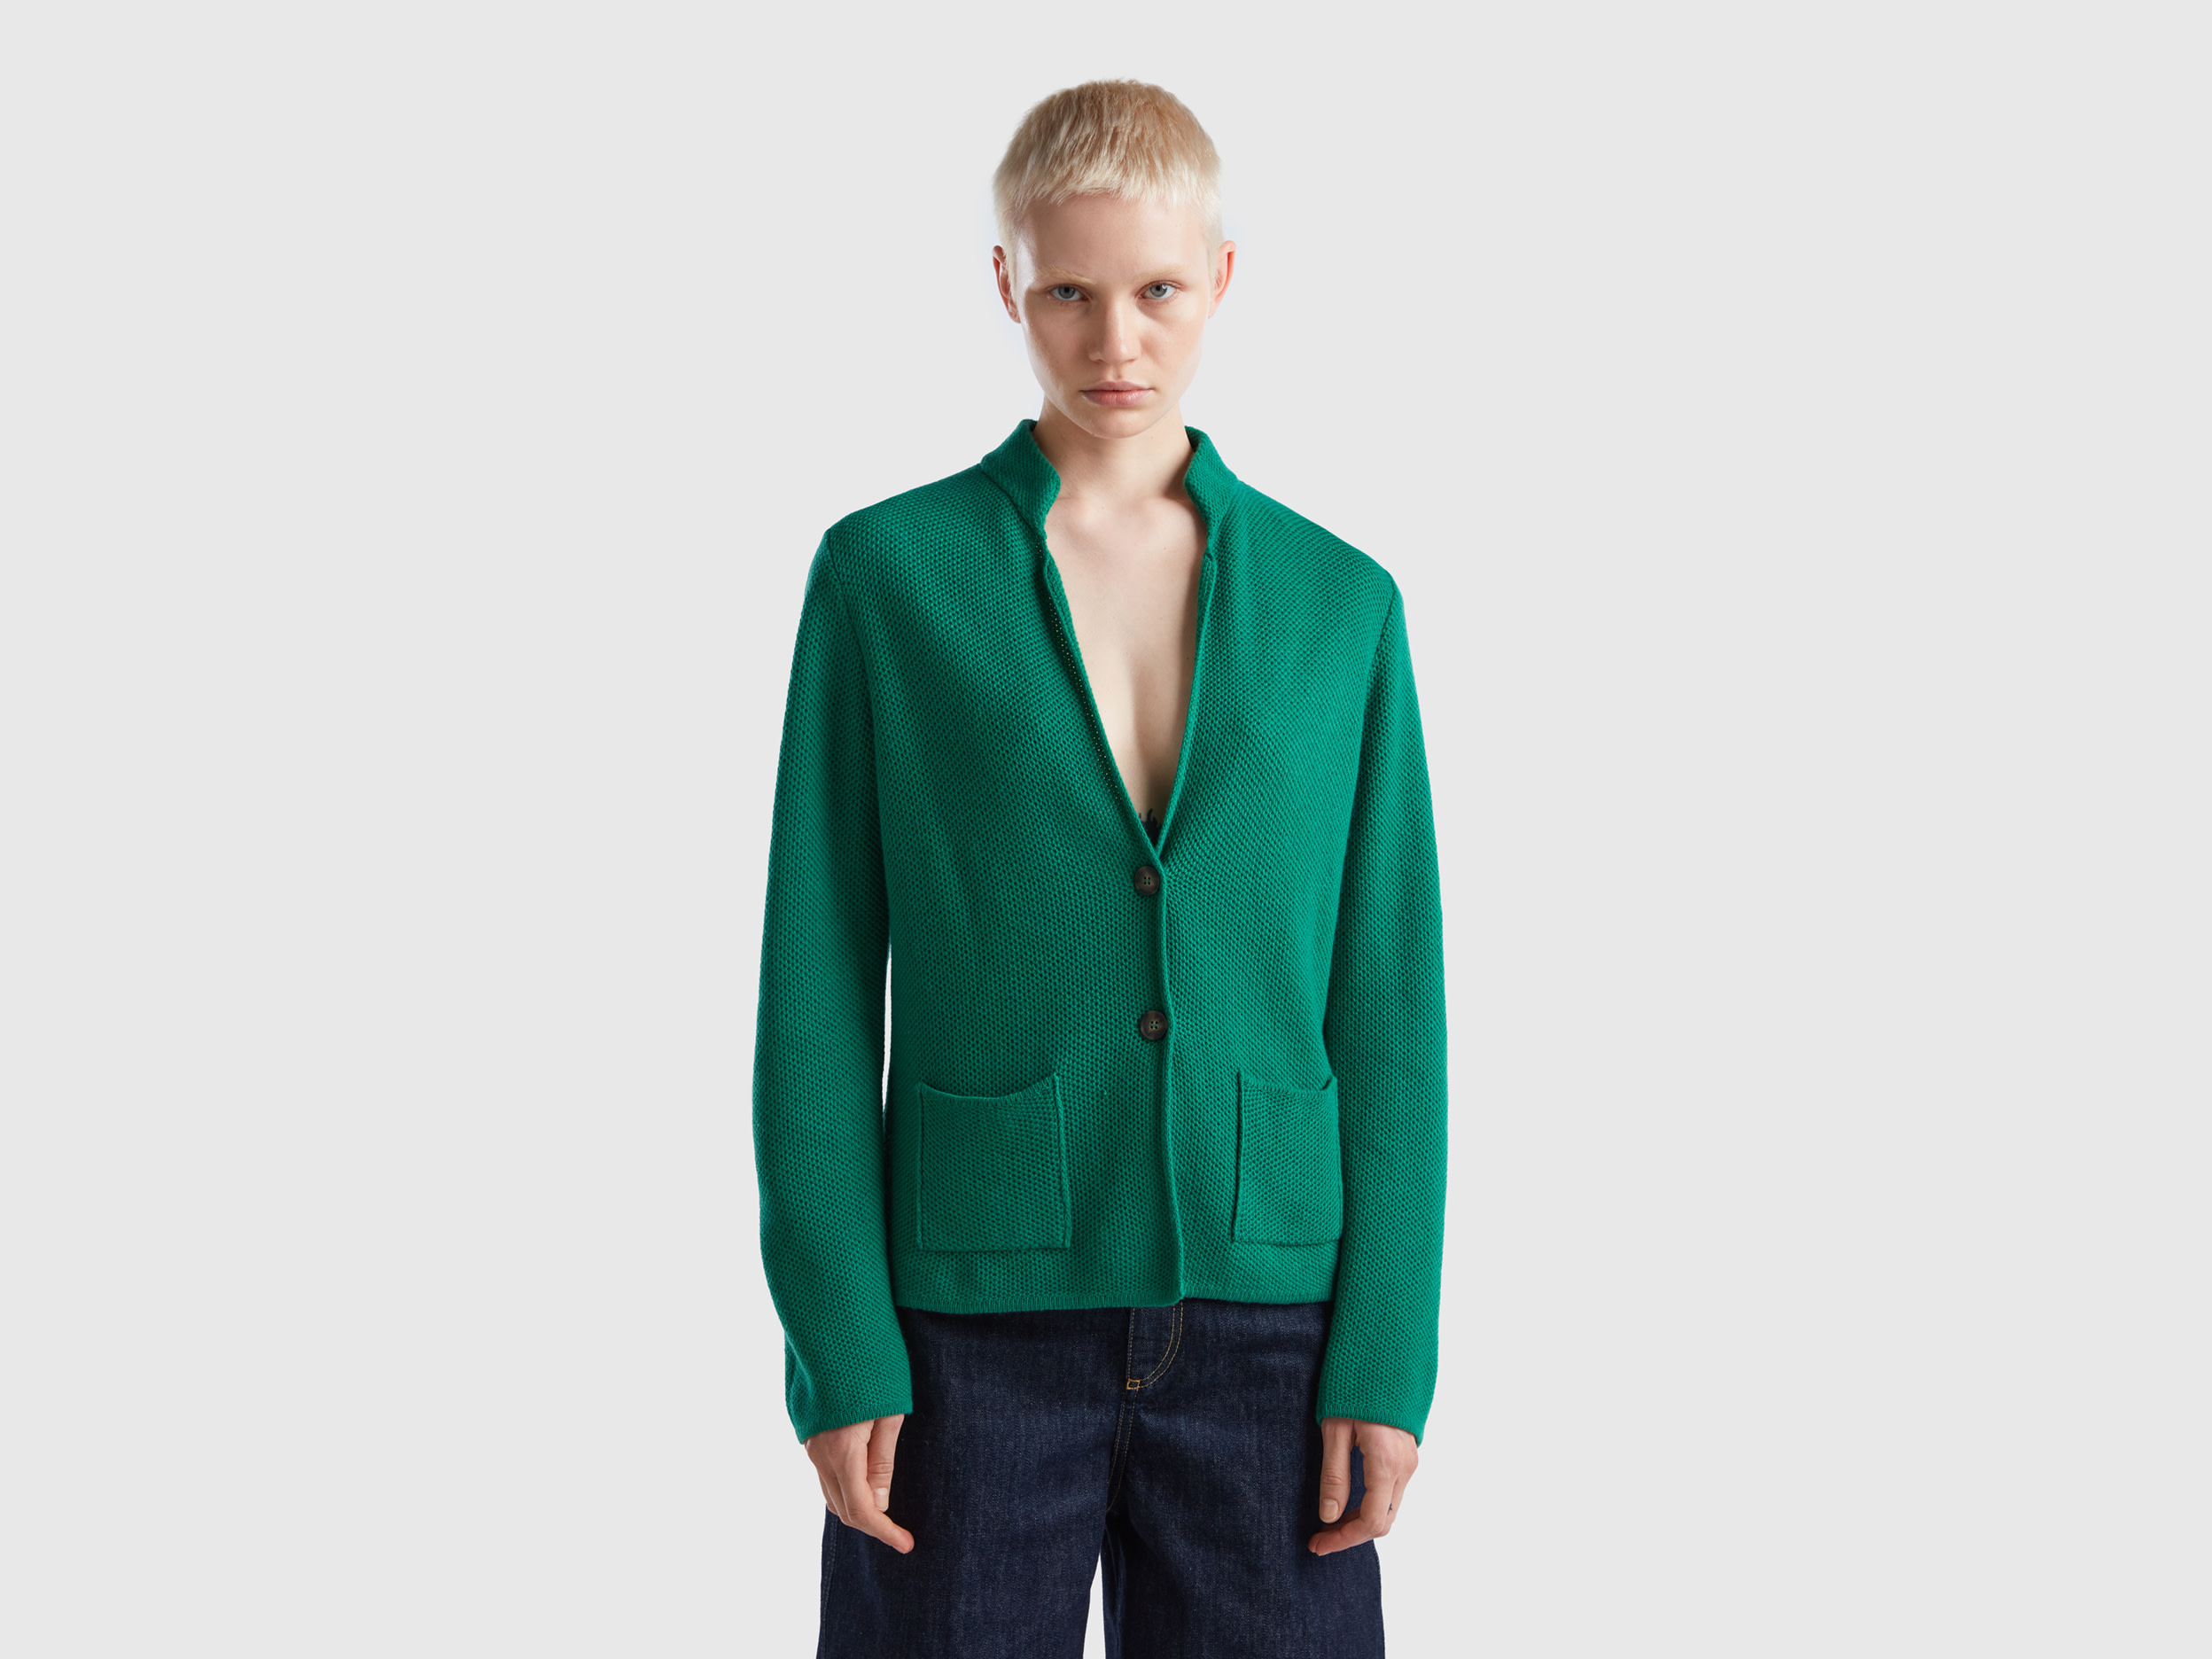 Benetton, Knit Jacket In Wool And Cashmere Blend, size L, Green, Women